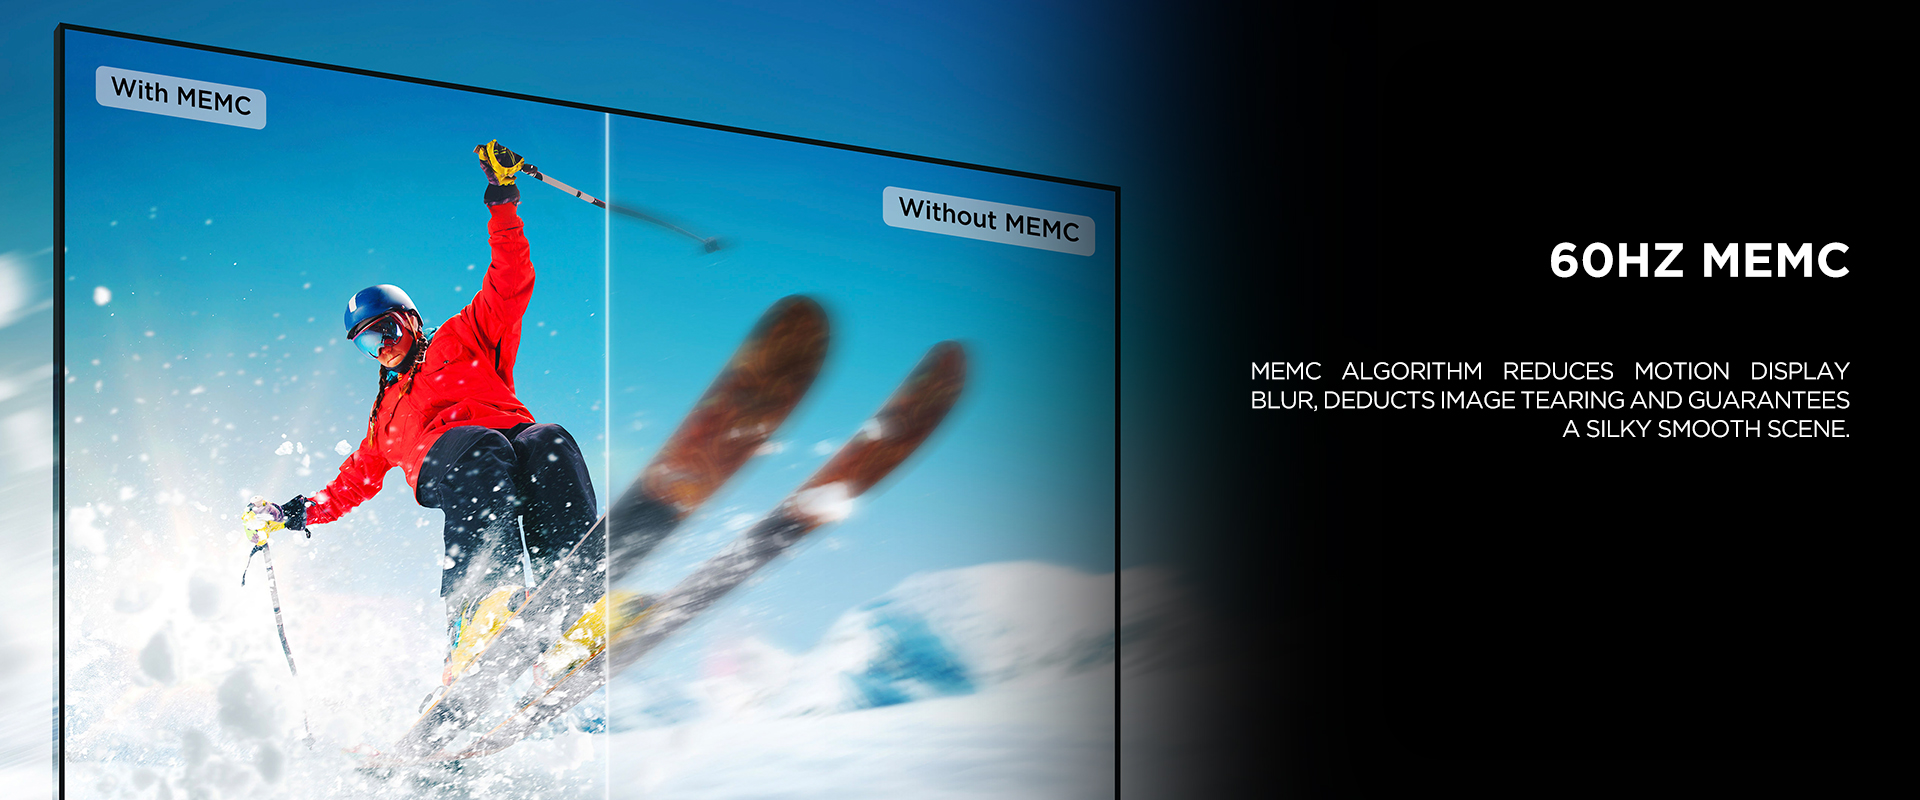 60HZ MEMC
- MEMC algorithm reduces motion display blur, deducts image tearing and guarantees a silky smooth scene.

